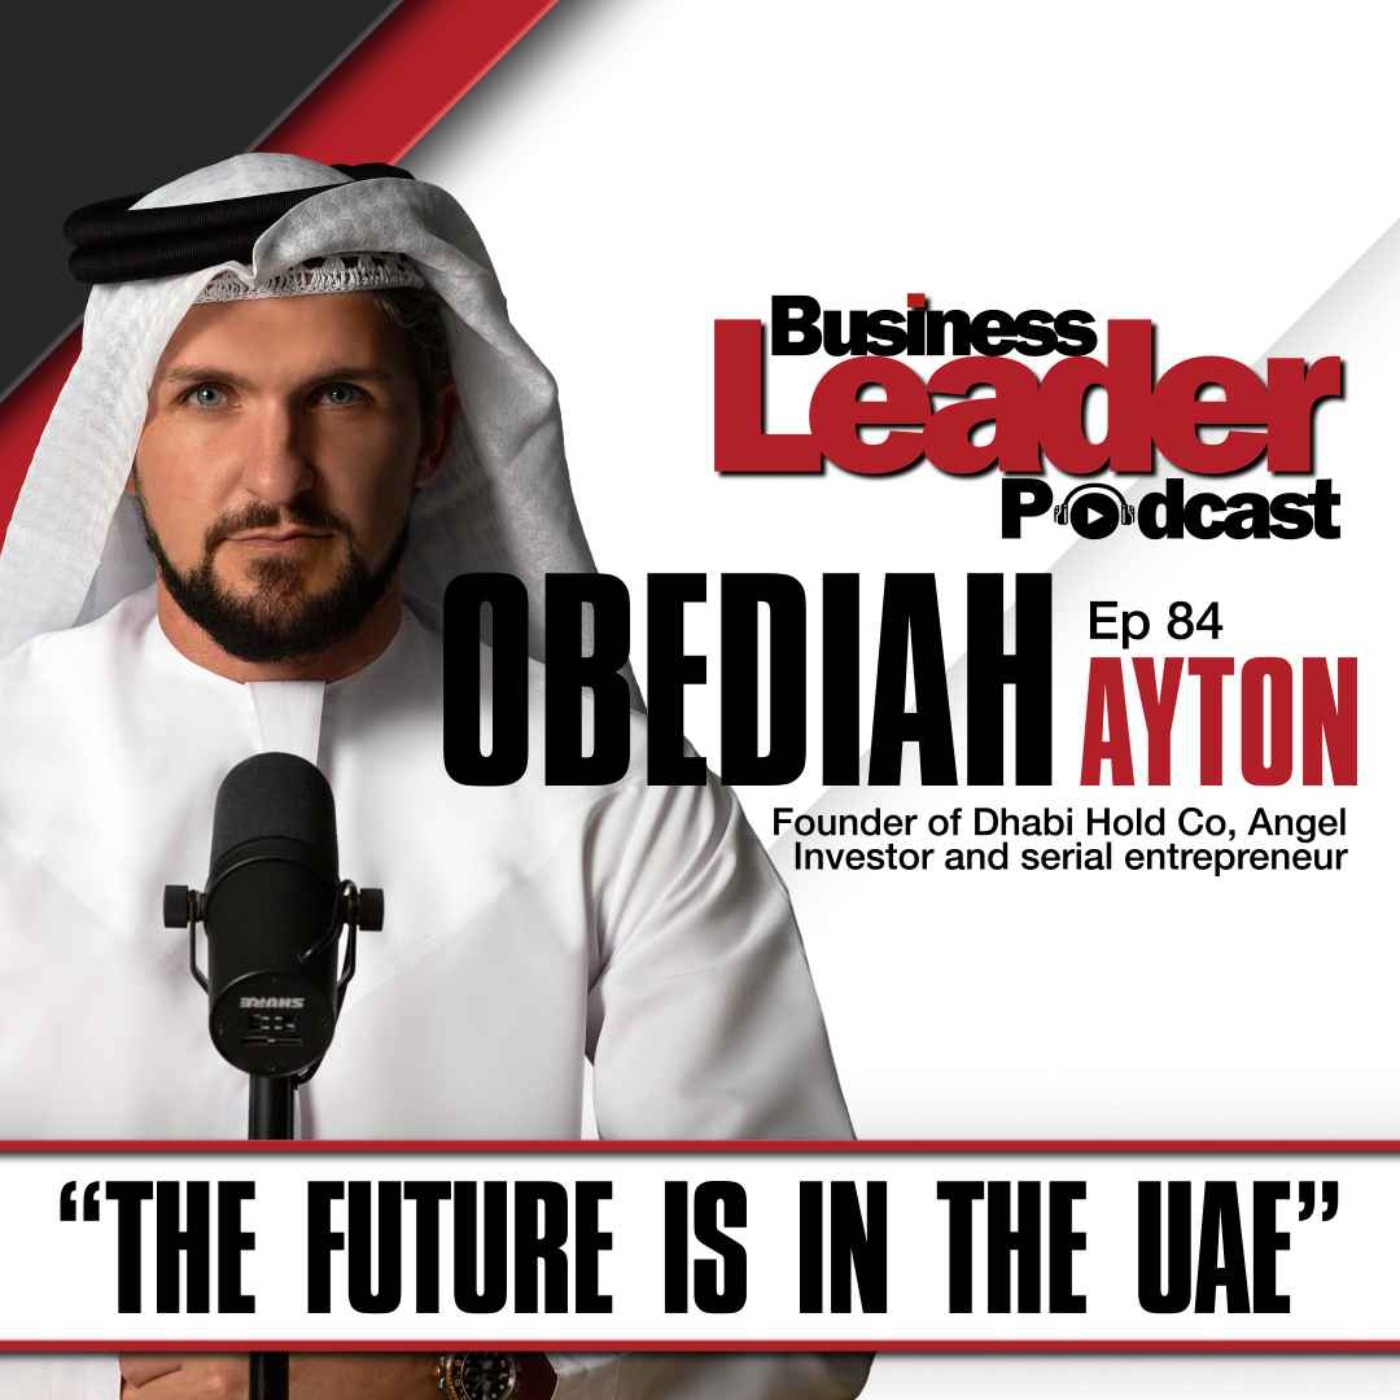 Obediah Ayton: “The future is in the UAE”